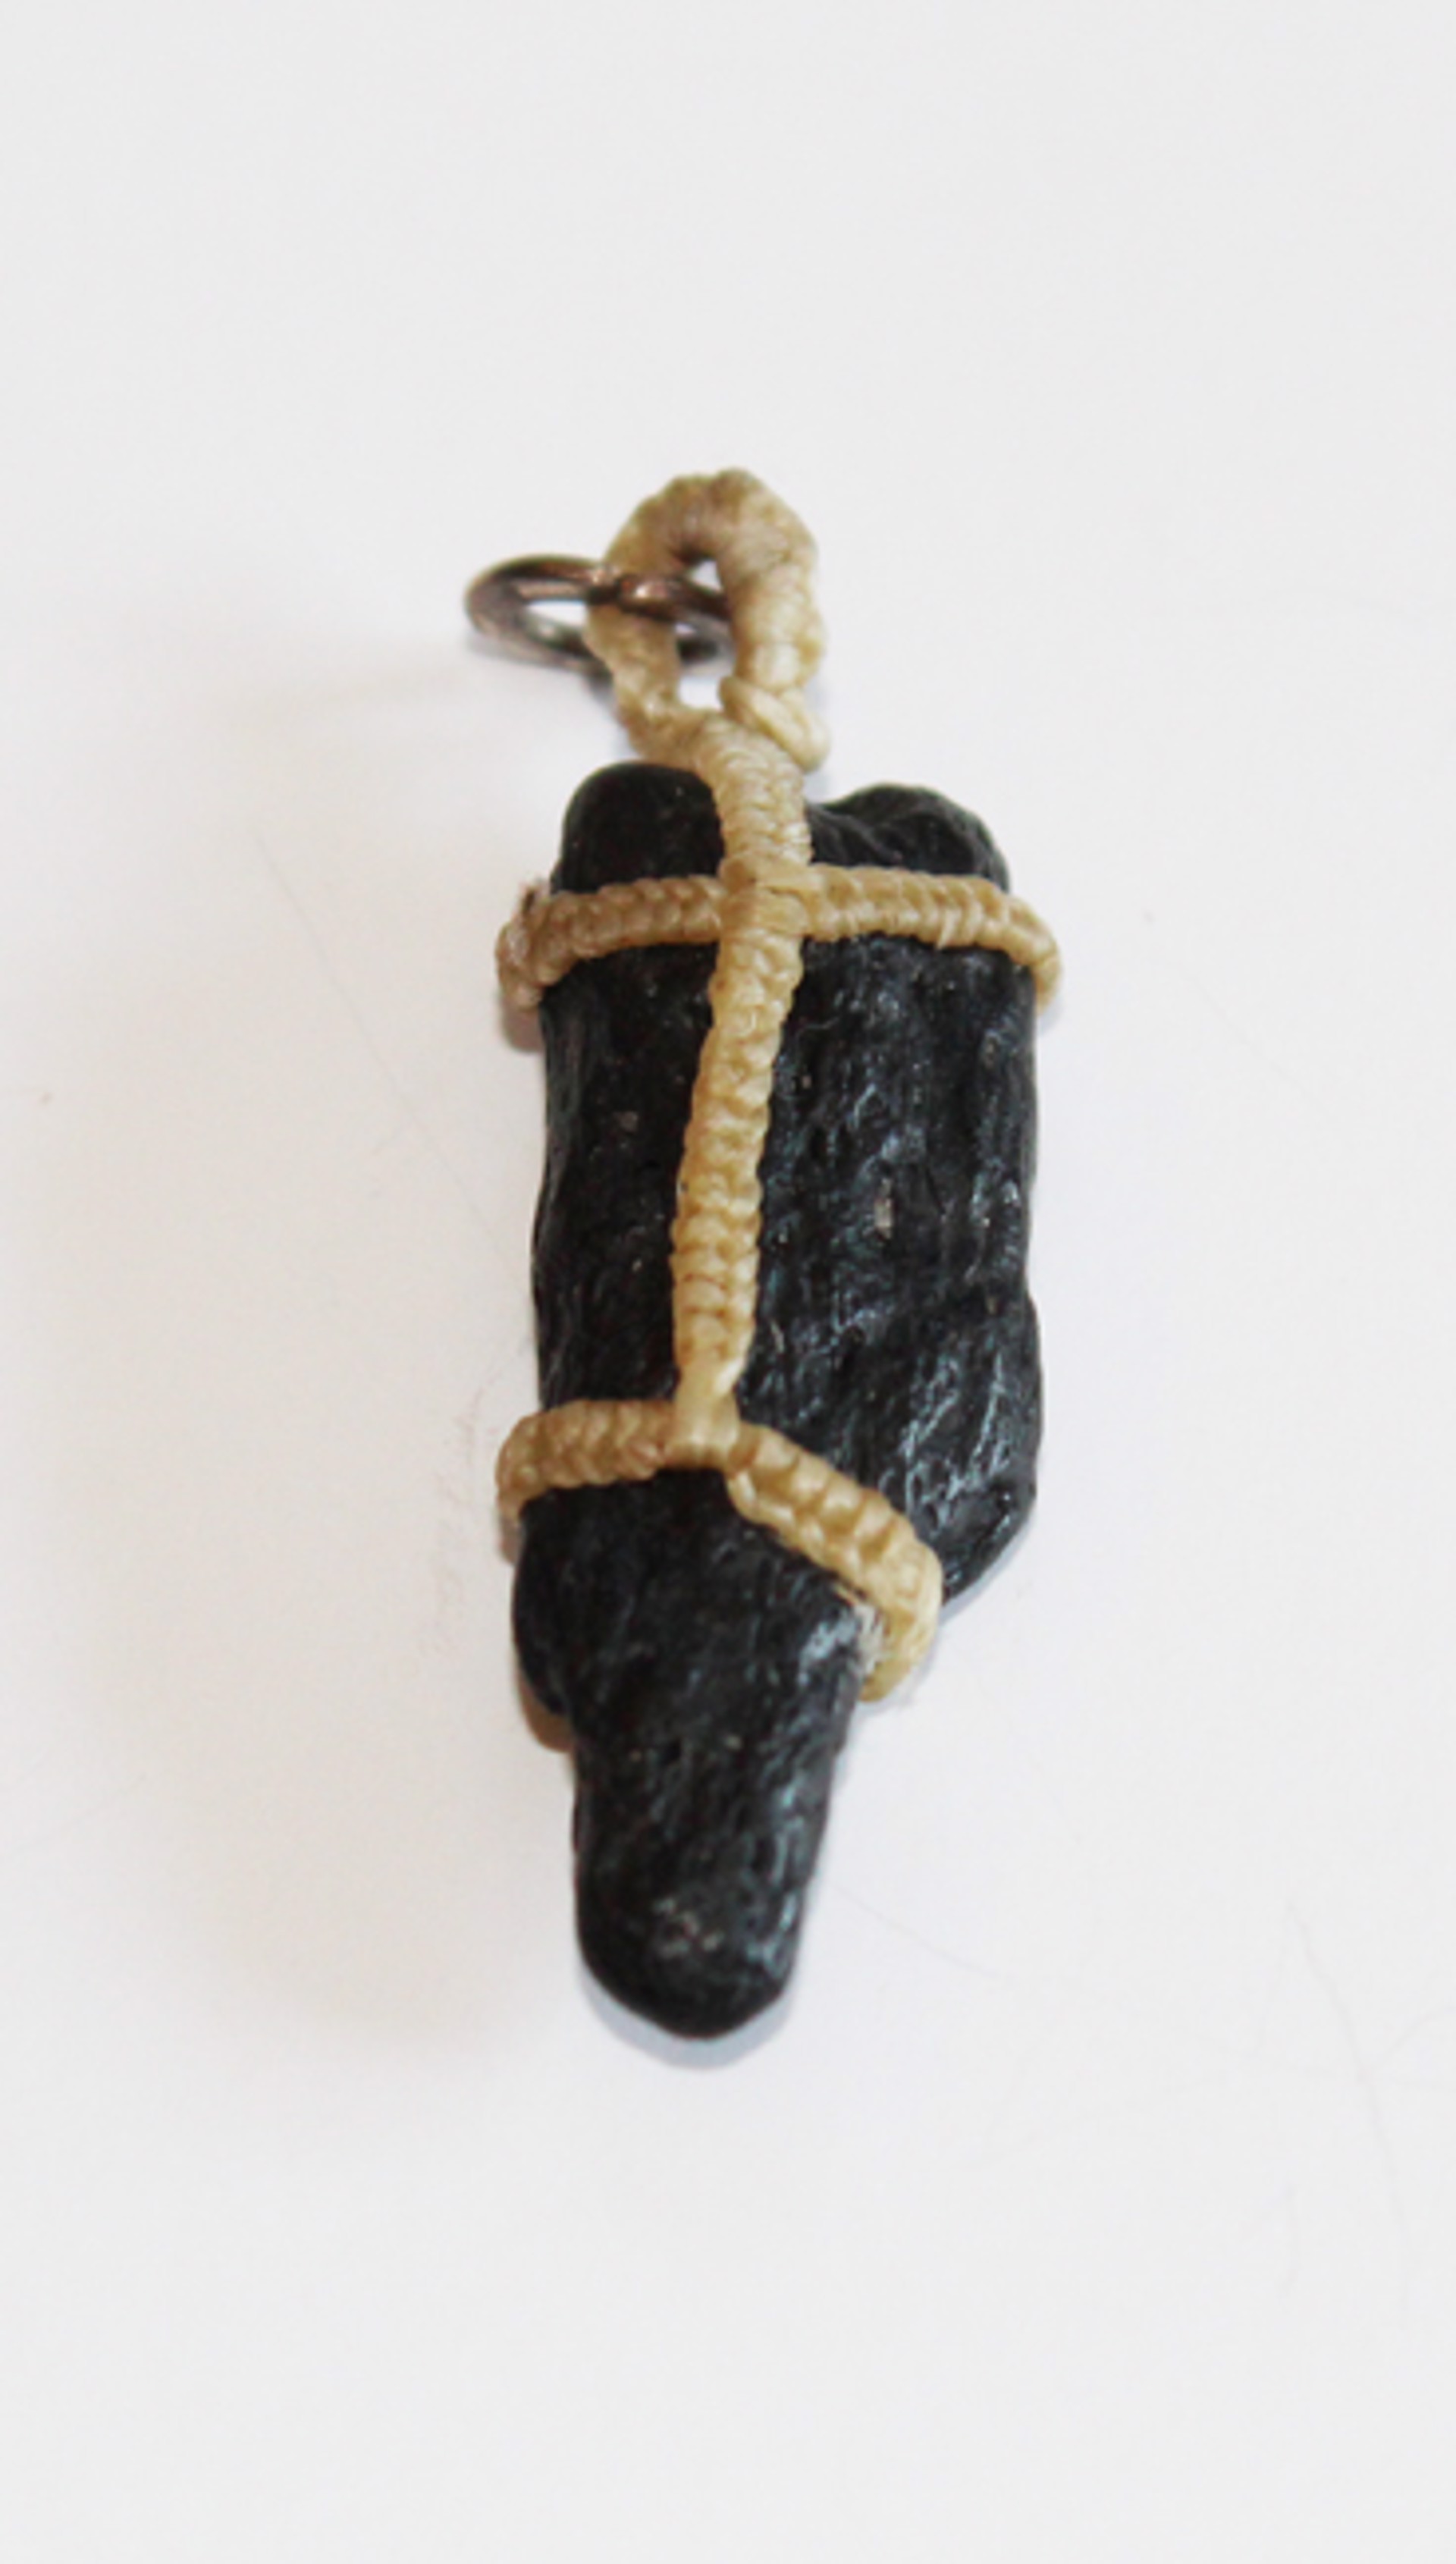 Knotted Pendant by Mary Lynn Portera